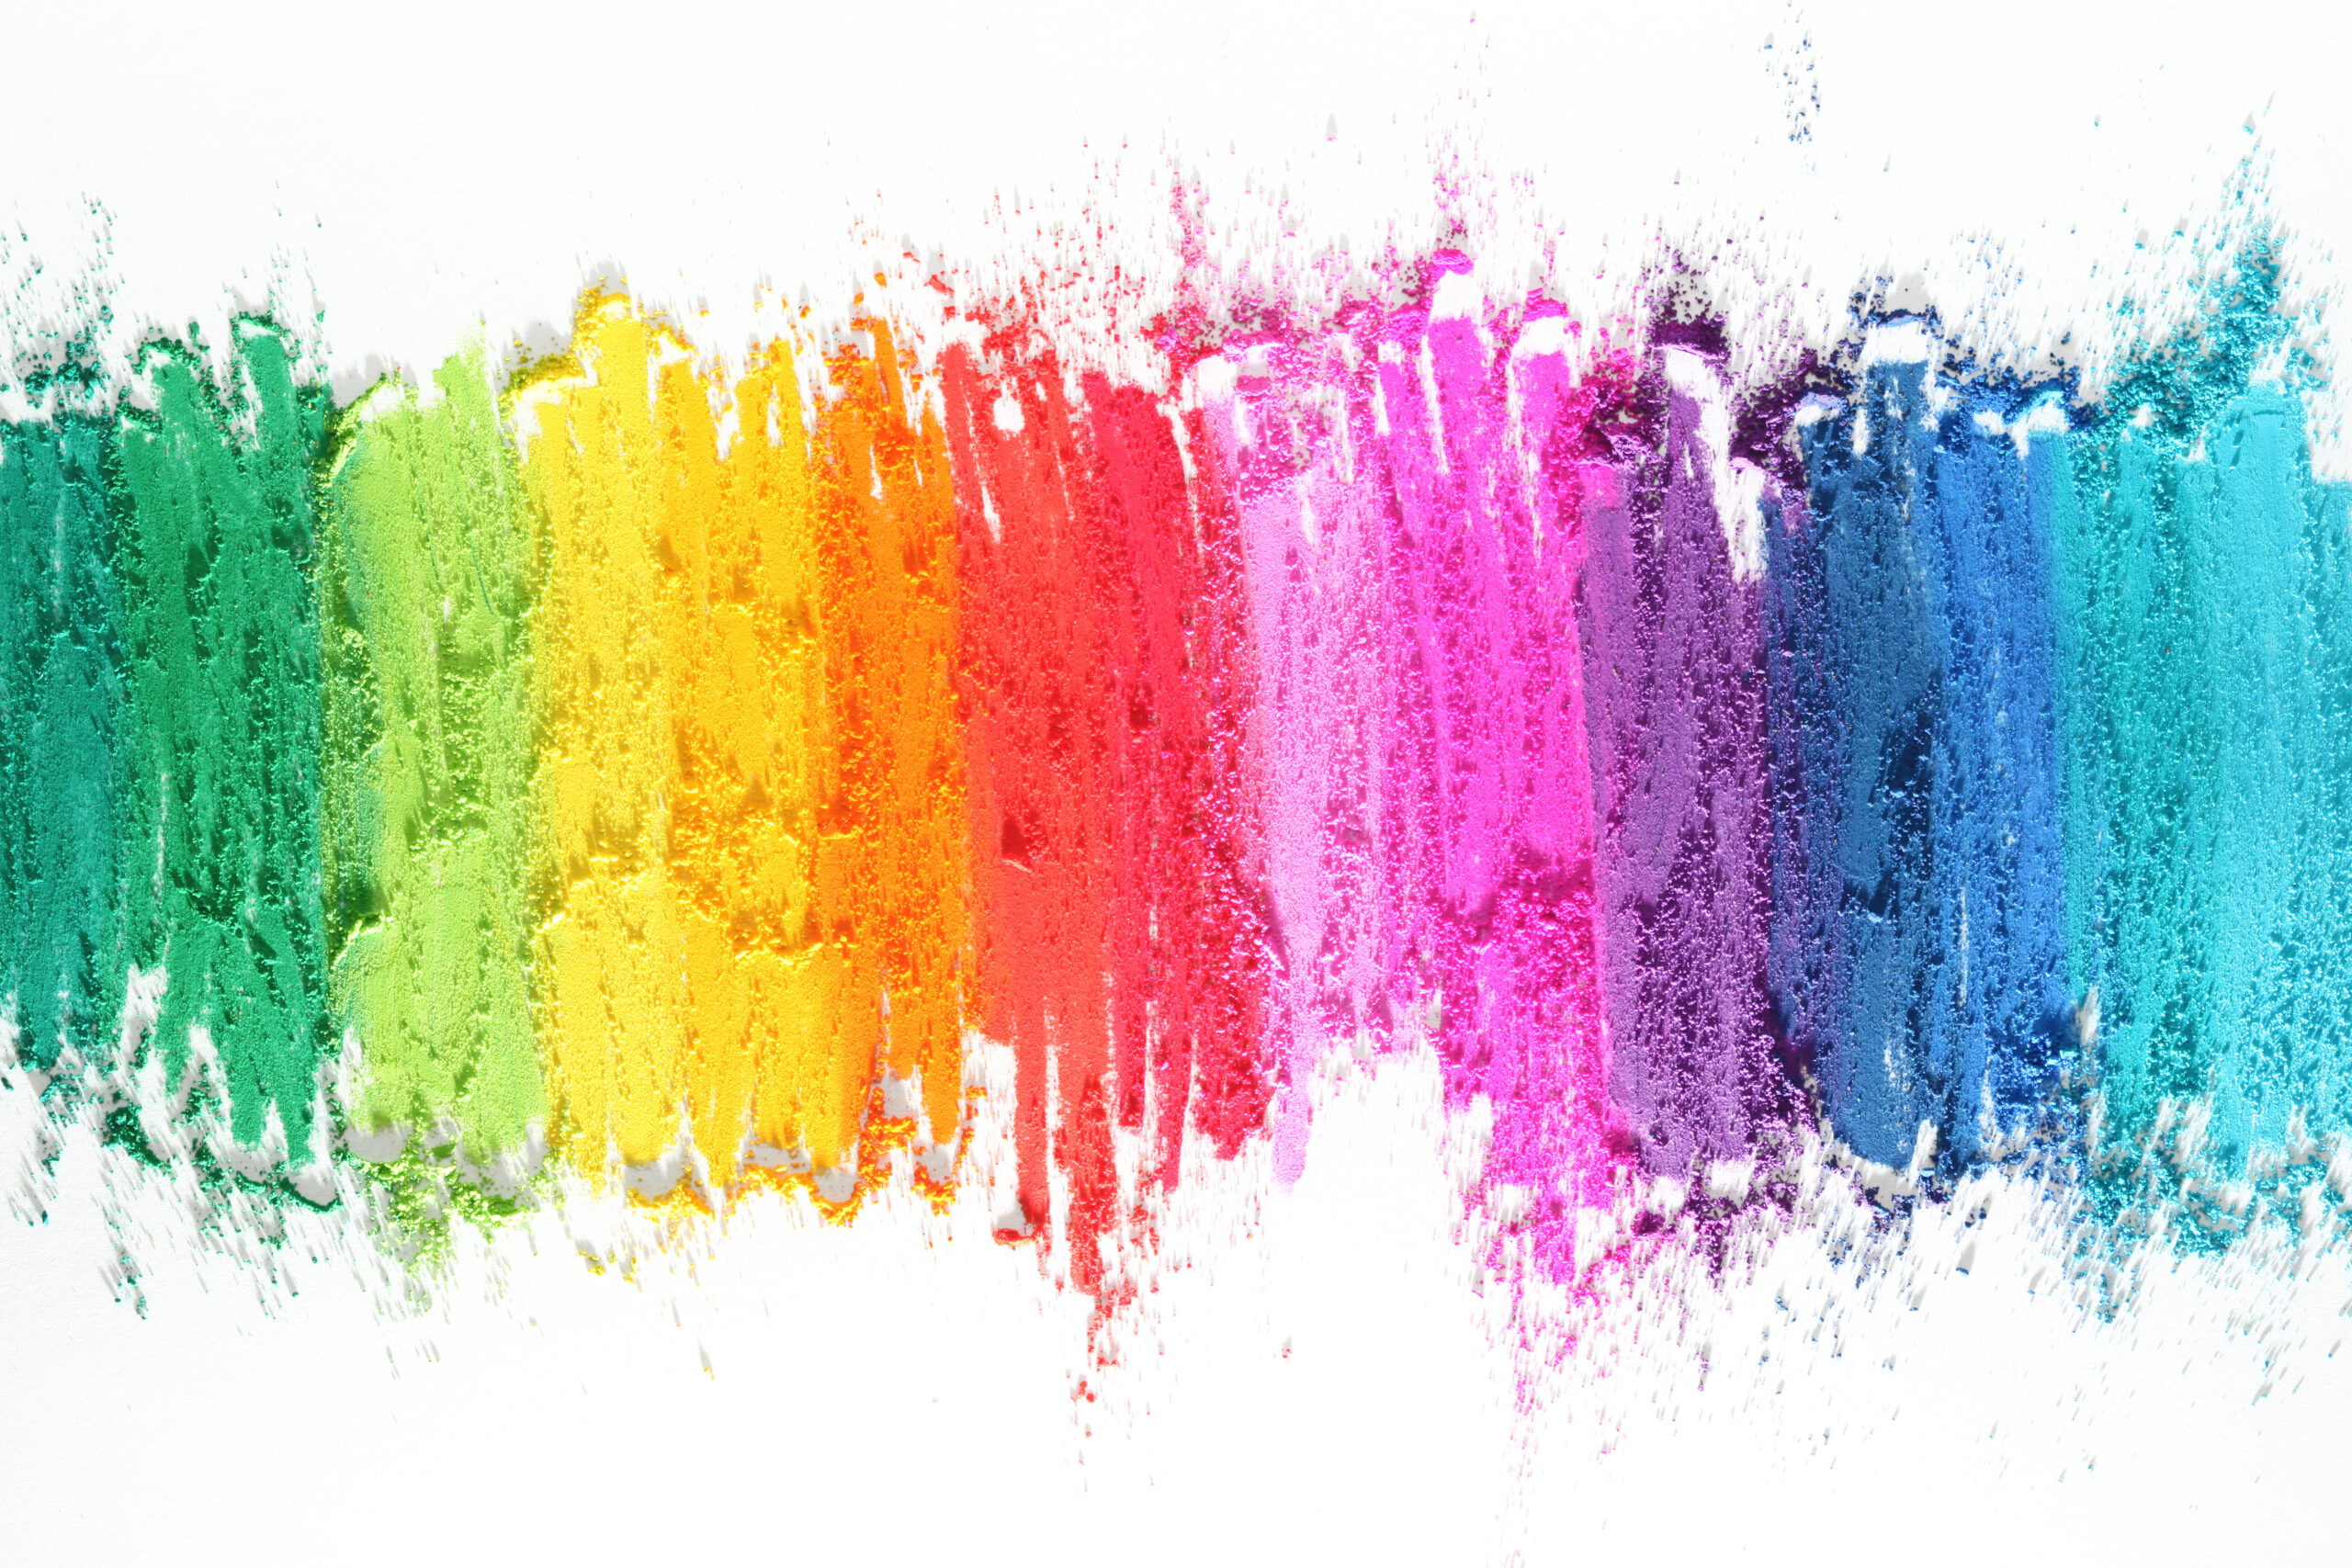 crayon colors scrubbed into a white background